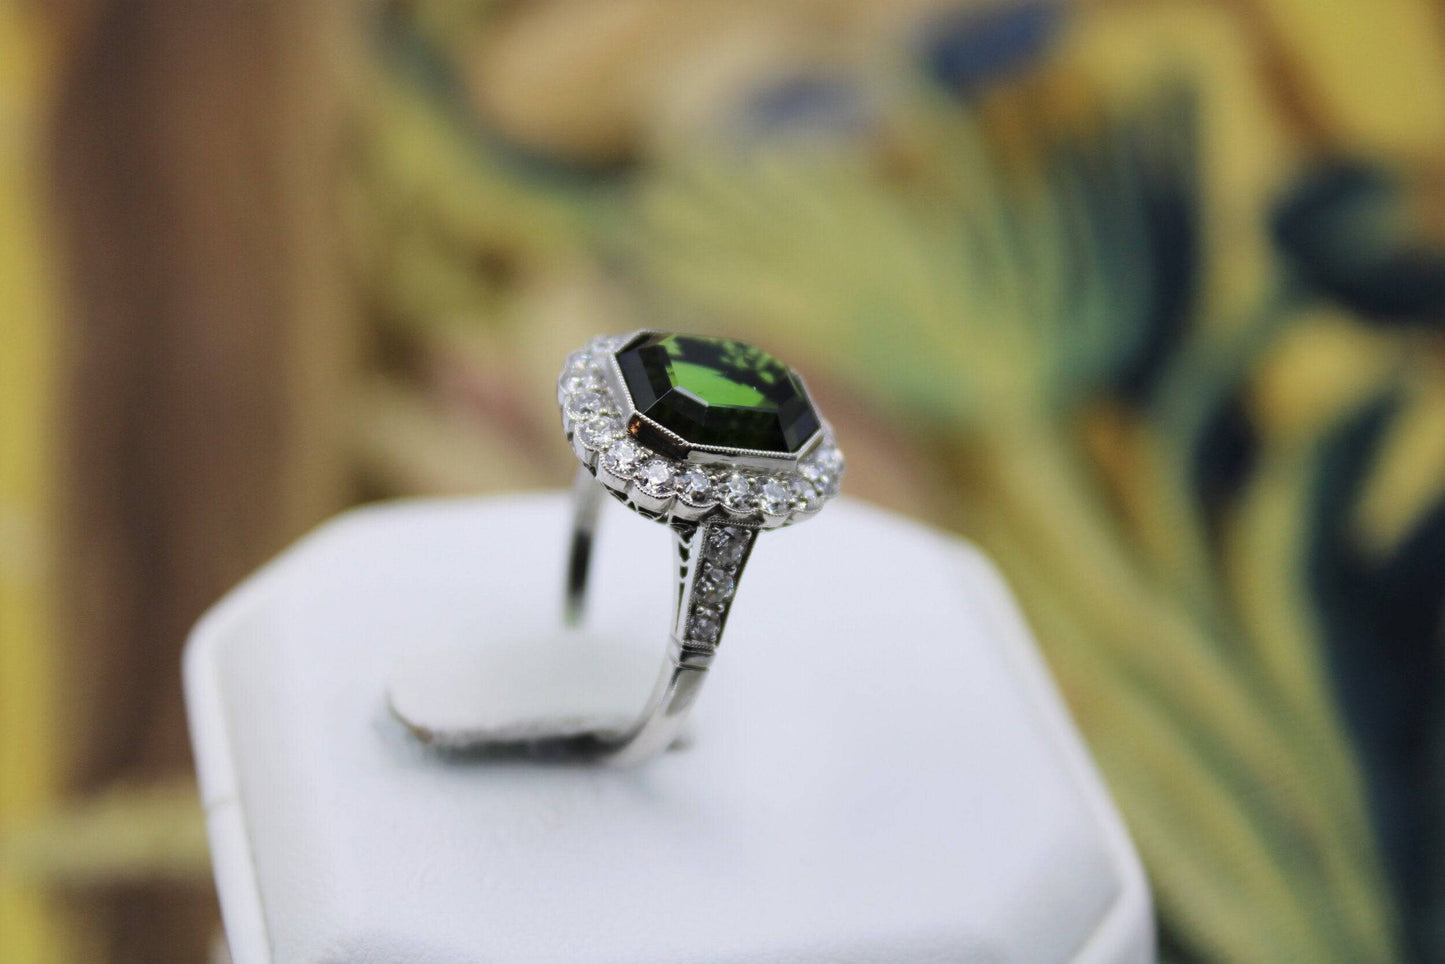 A very fine Green Tourmaline cluster Ring set in Platinum, Pre-Owned - Robin Haydock Antiques